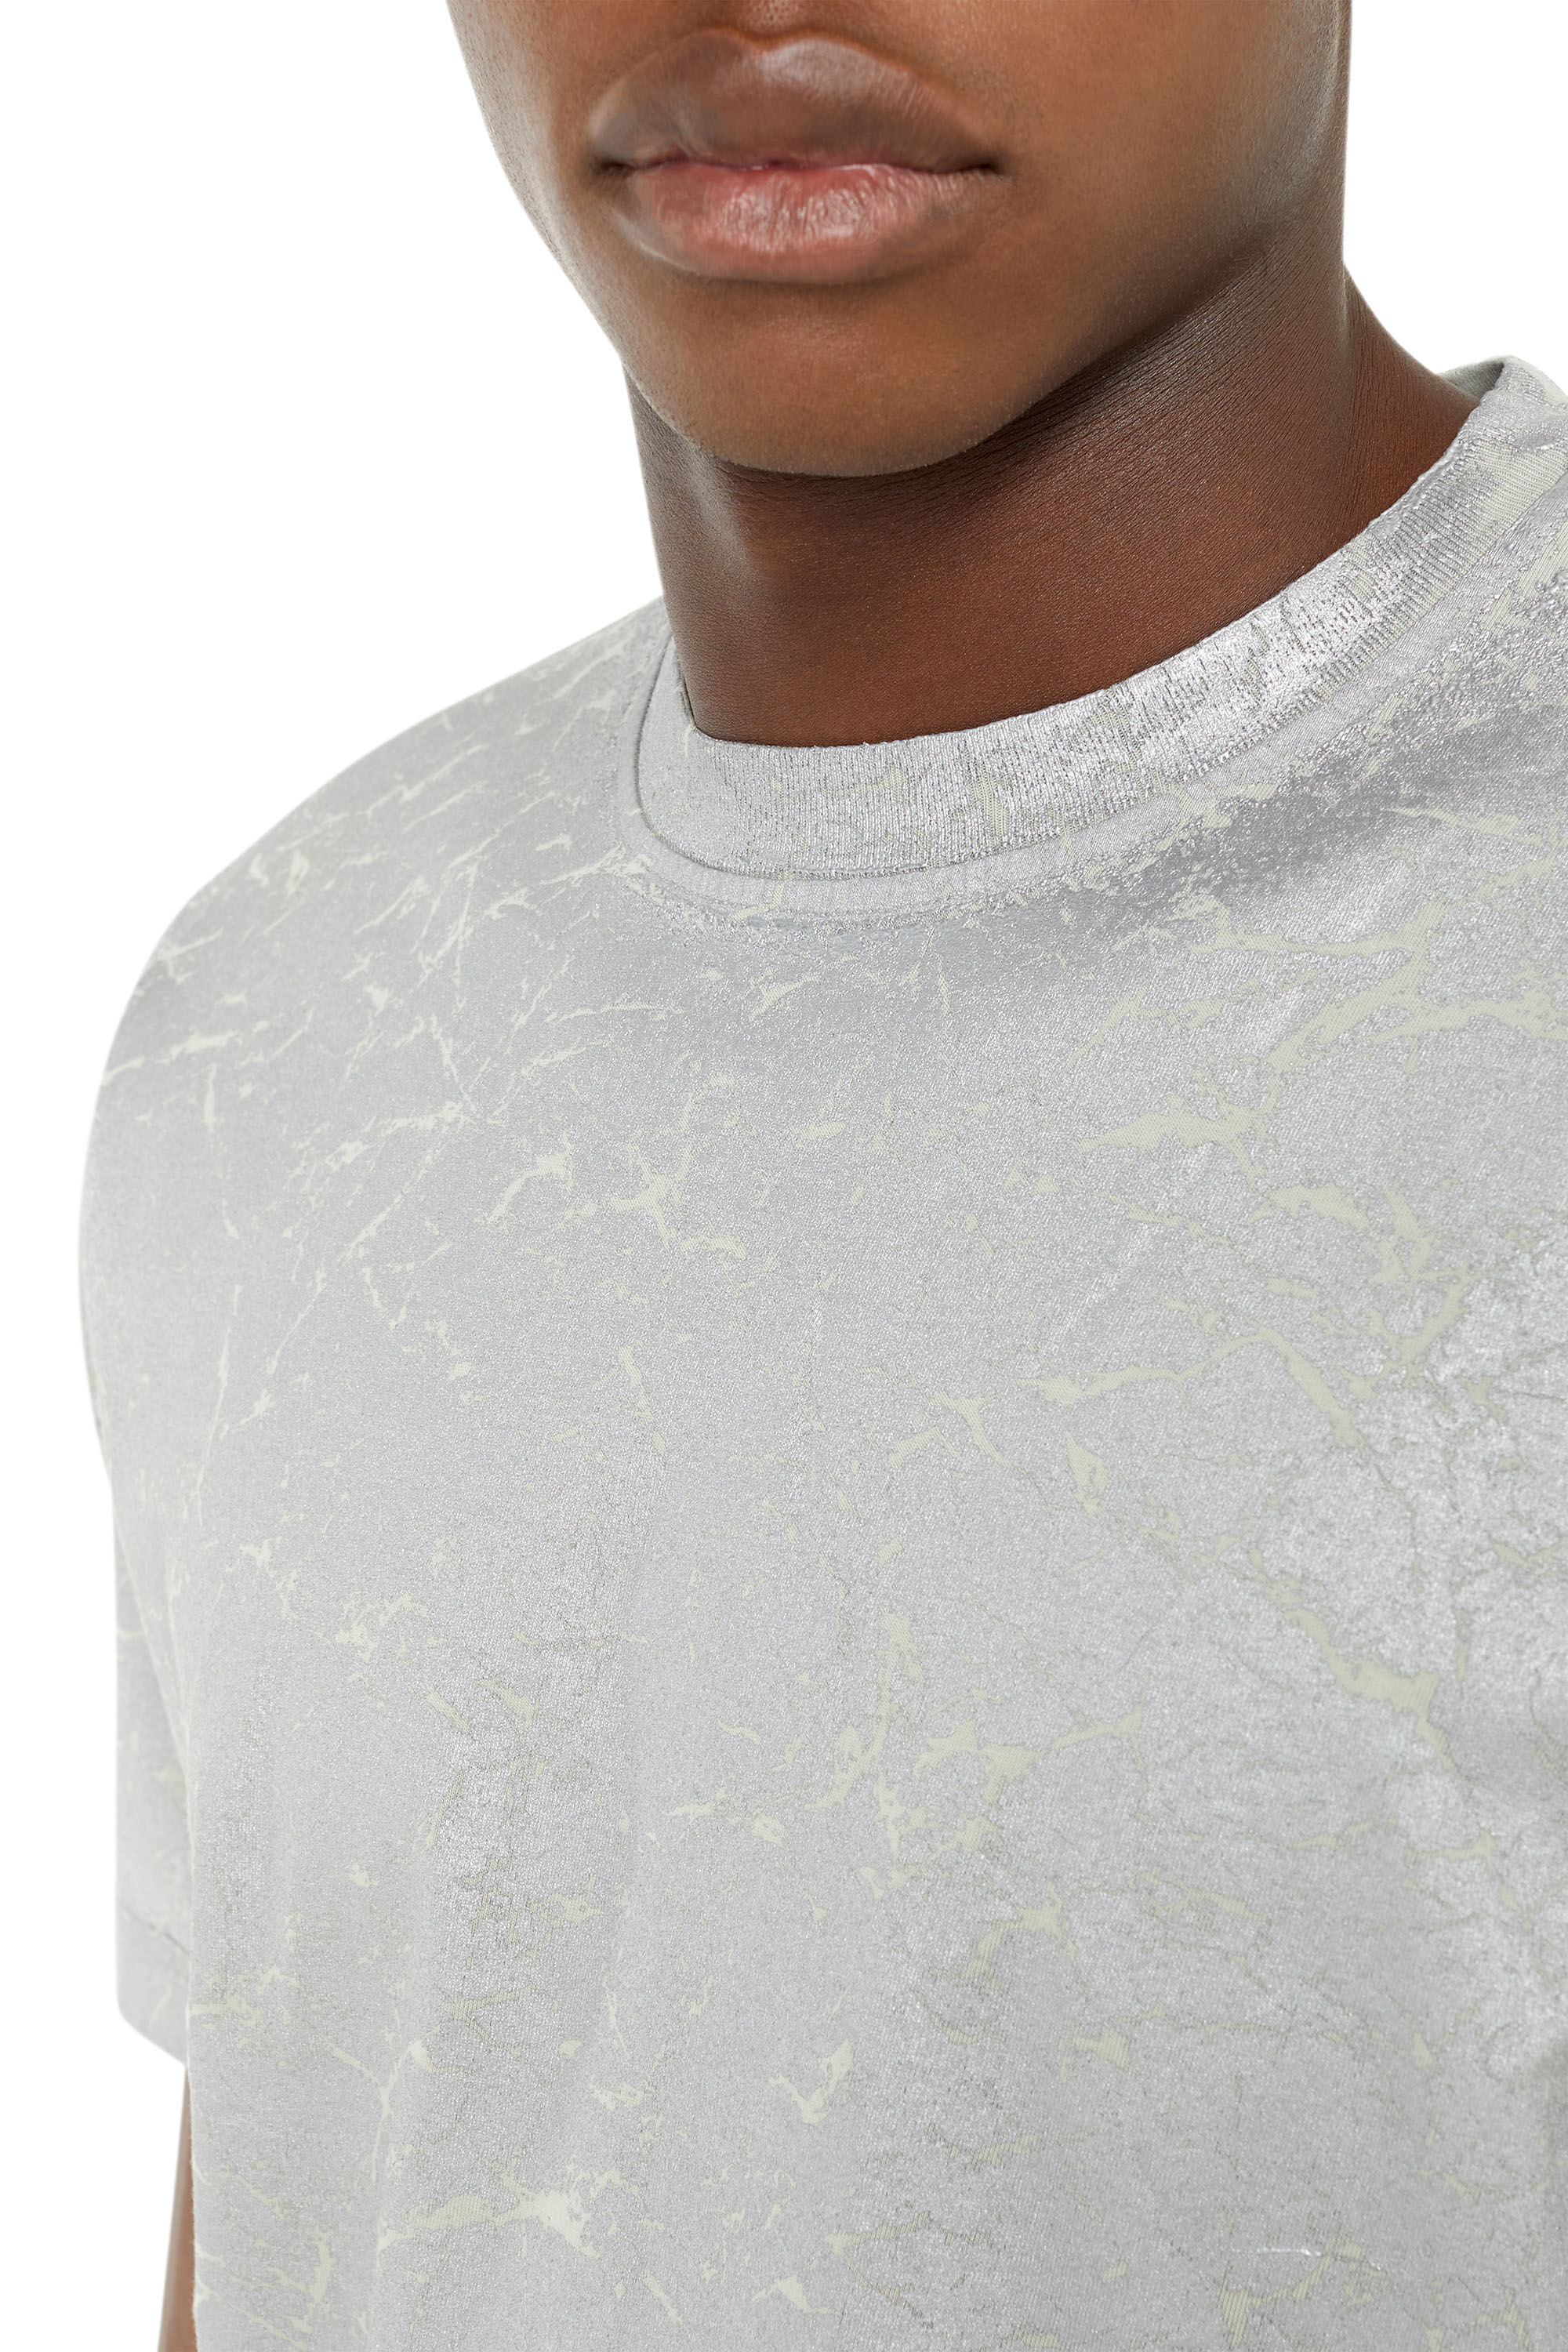 T-JUST-RAW Man: T-shirt with cracked print